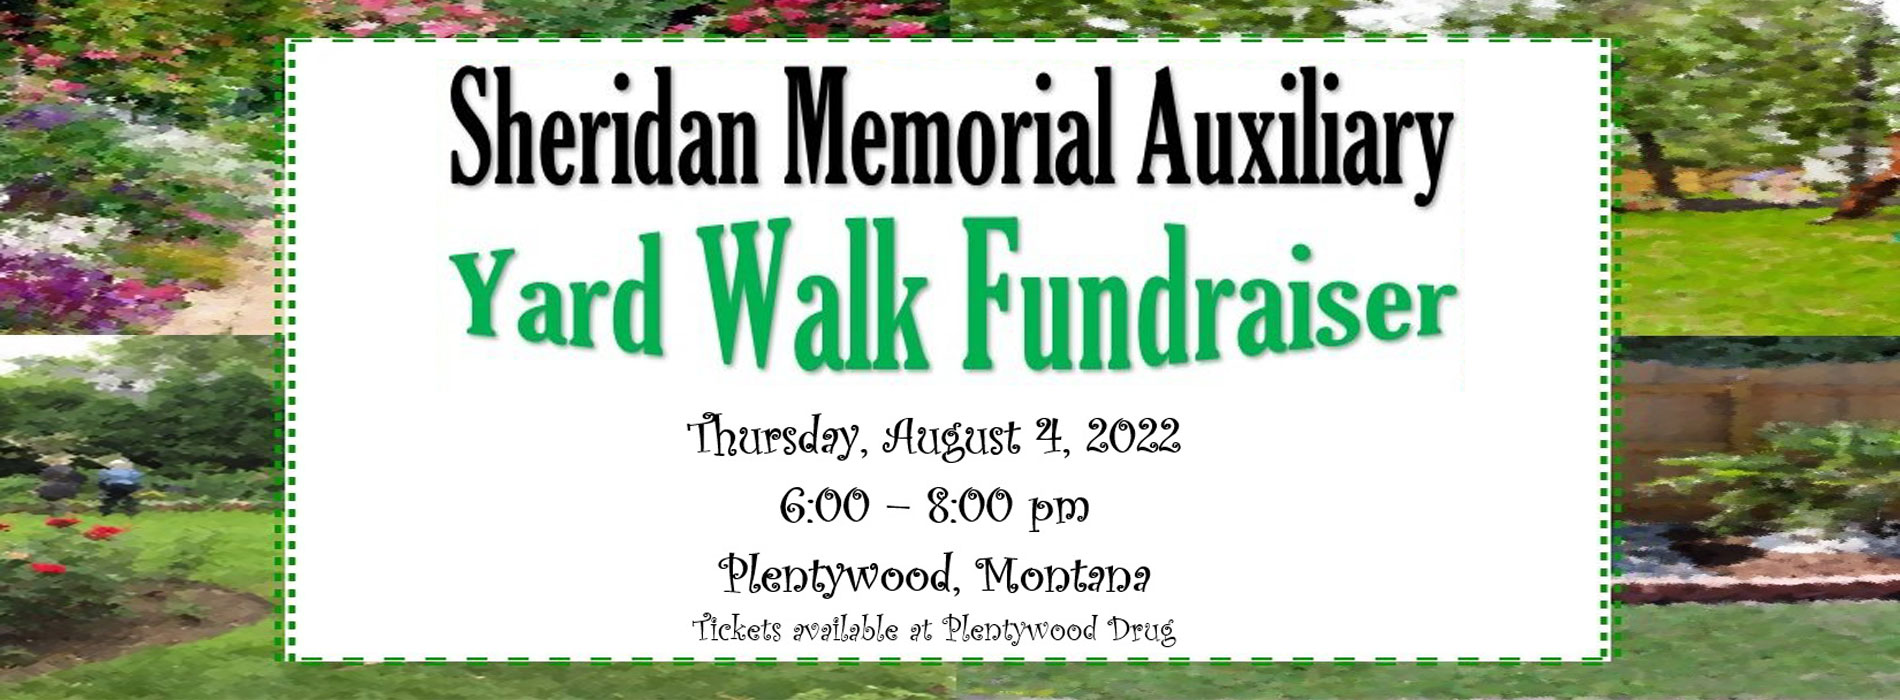 Banner picture of two backgrounds of Gardens with lots of beautiful flowers. Banner says:
Sheridan Memorial Auxiliary
Yard Walk Fundraiser
Thursday, August 4, 2022
6:00-8:00 pm
Plentywood, Montana
Tickets available at Plentywood Drug